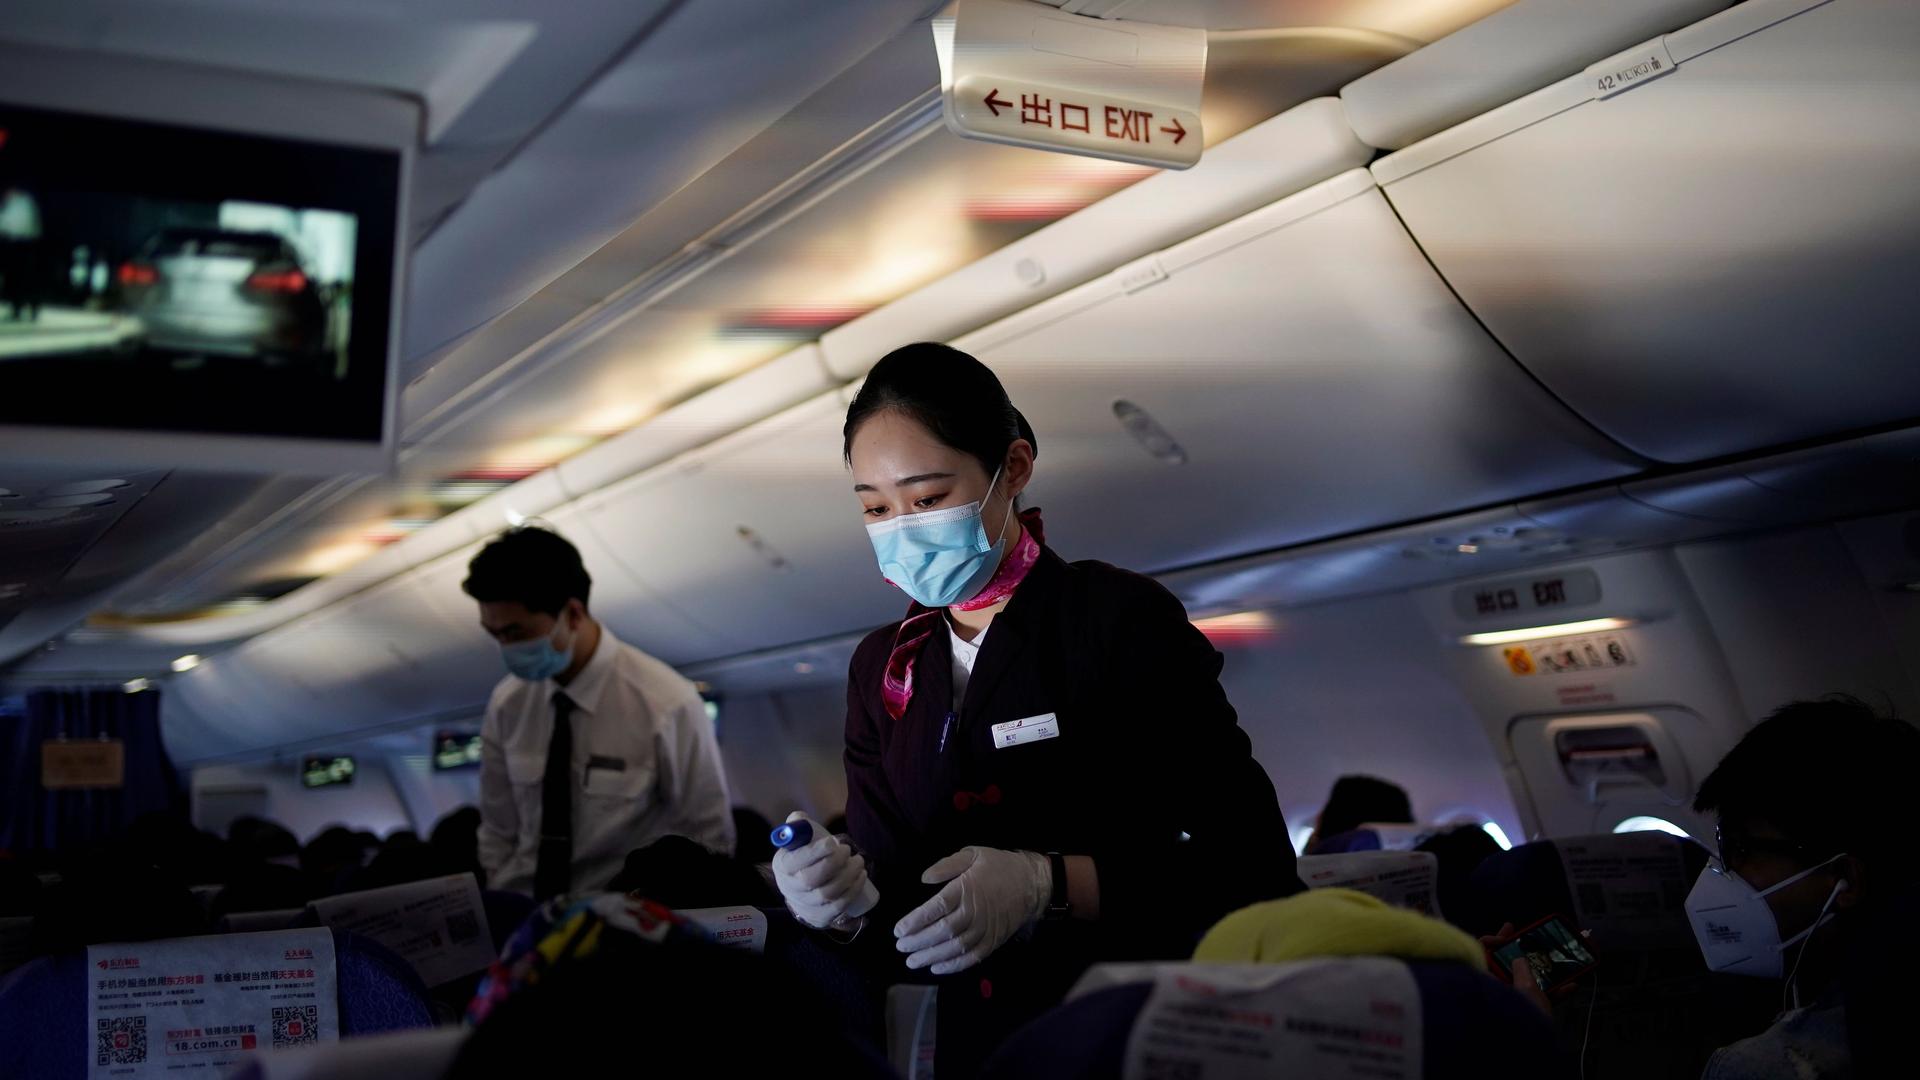 A flight attendant wearing a face mask to prevent the spread of coronavirus disease (COVID-19) takes body temperature measurements of passengers with a thermometer on a Shanghai Airlines flight in Shanghai, China, March 25, 2020. 